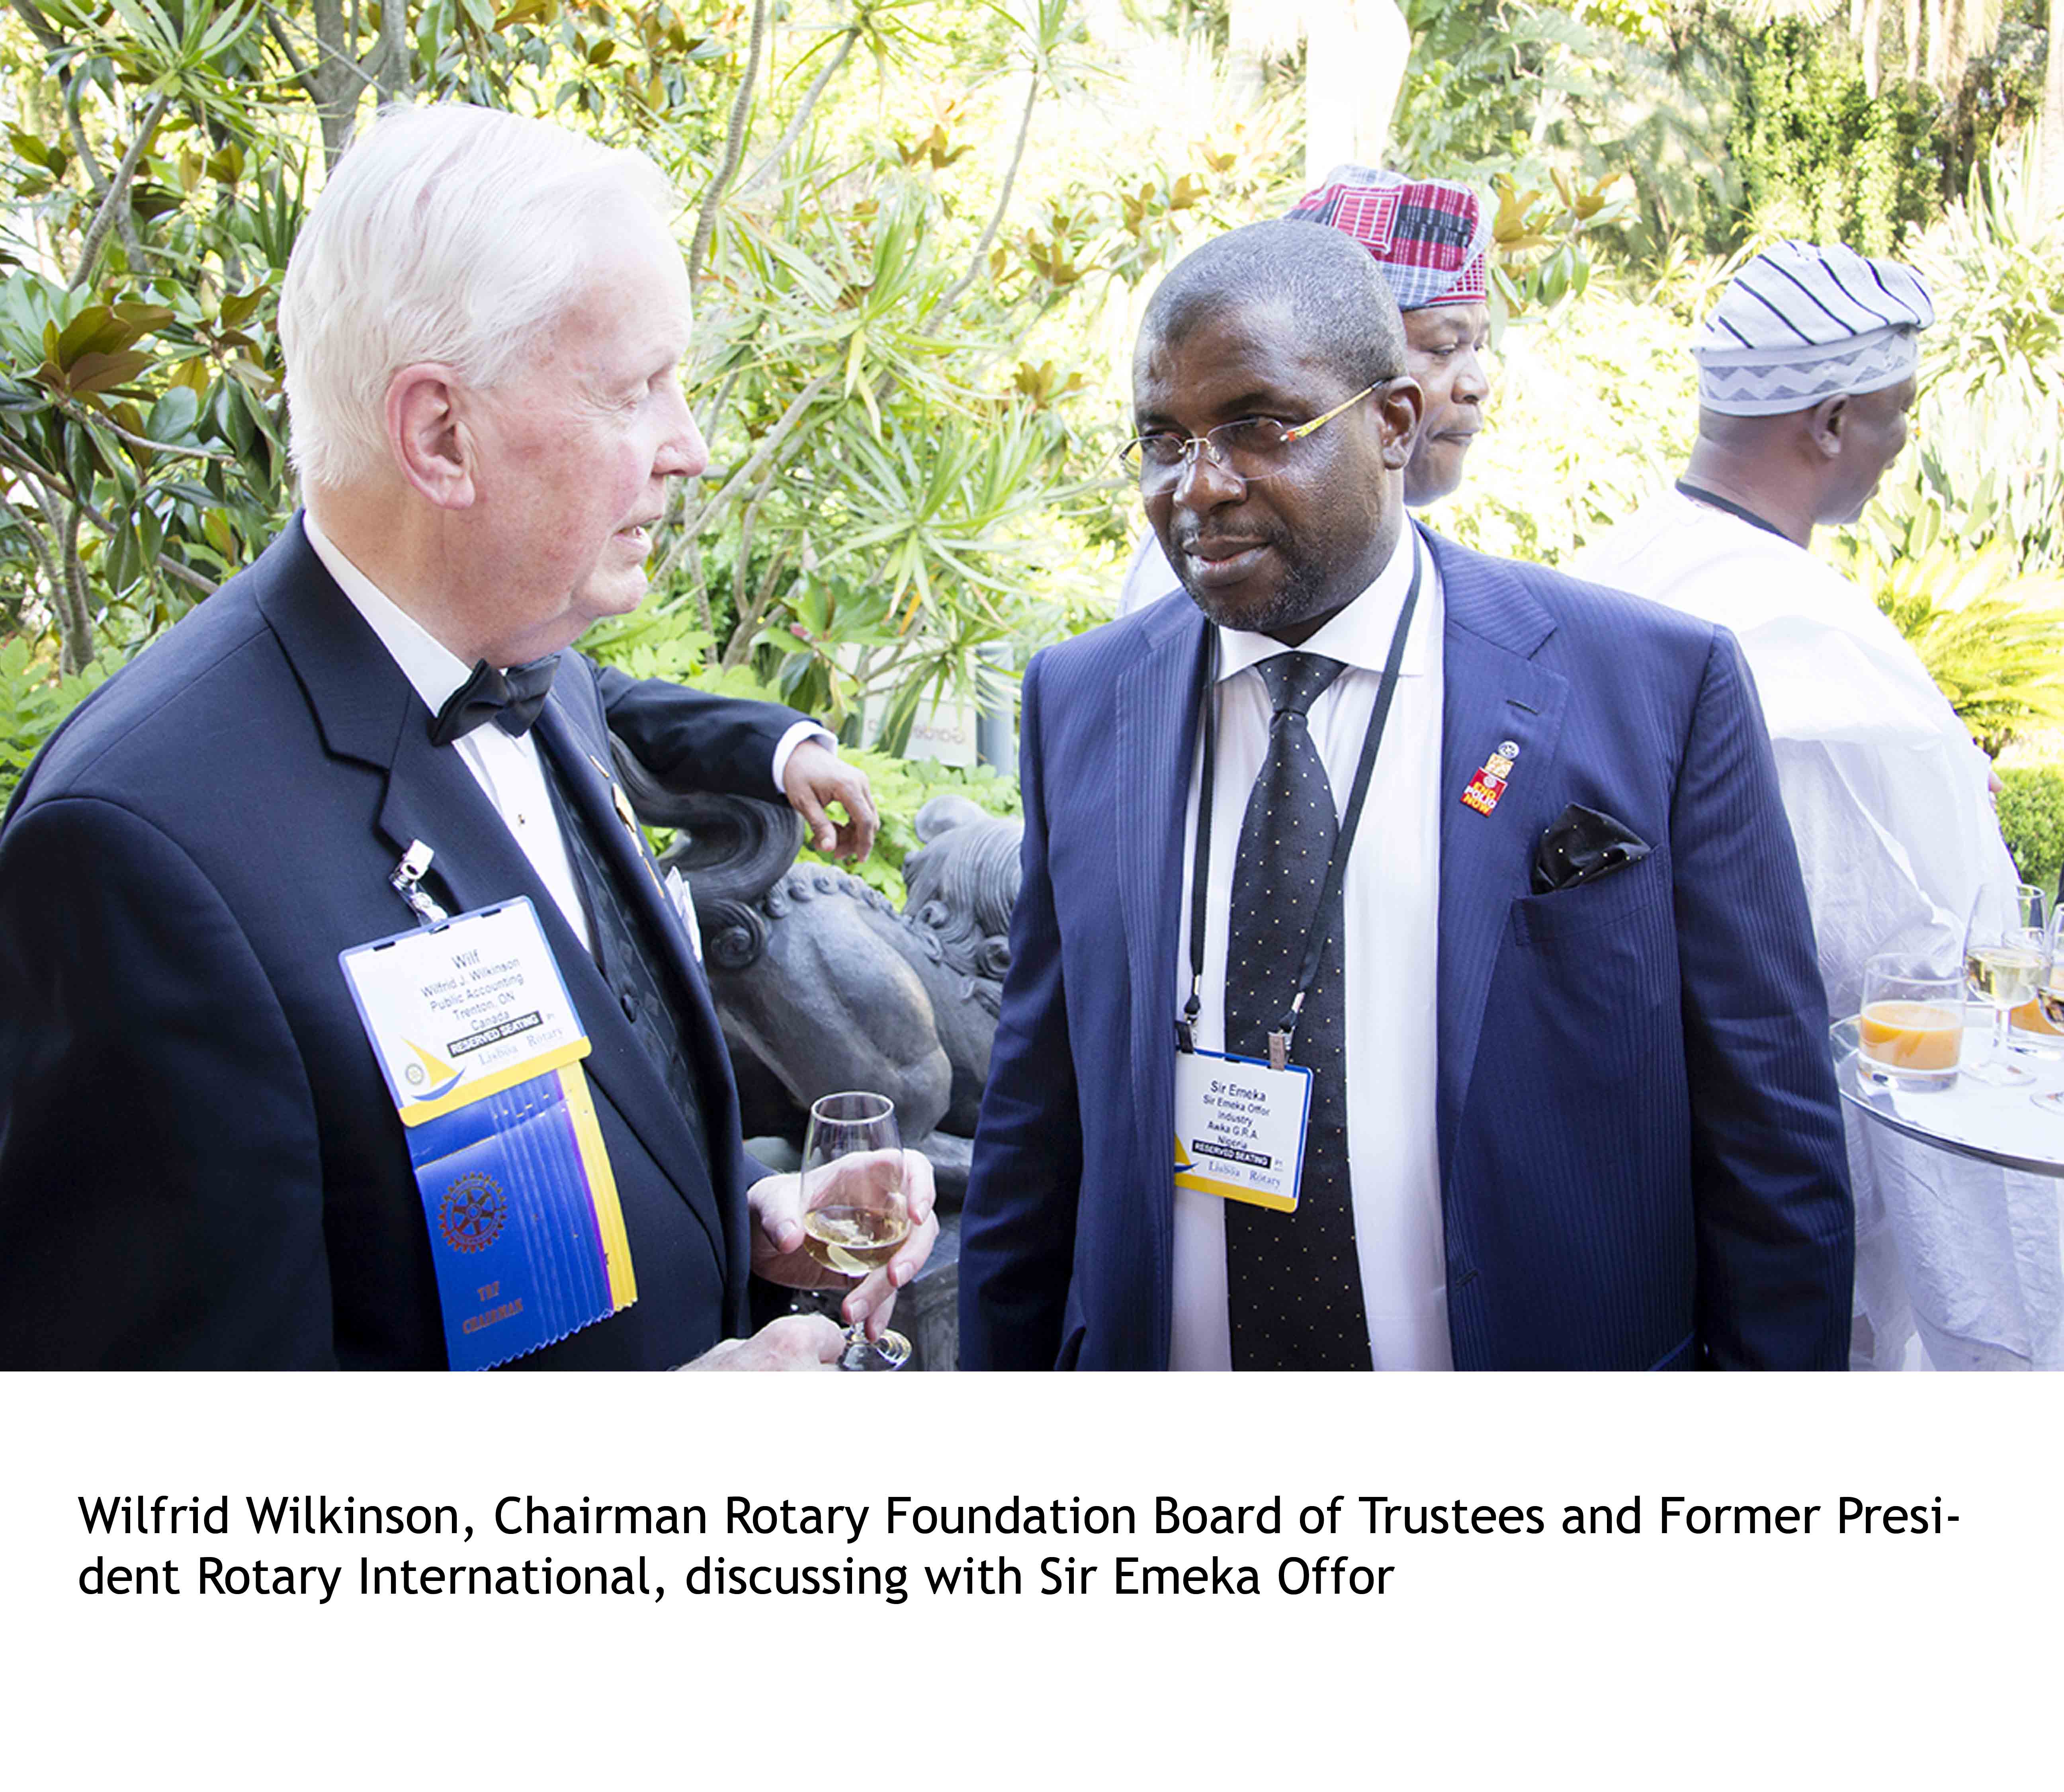 Sir Emeka Offor at Annual Convention of Rotary International